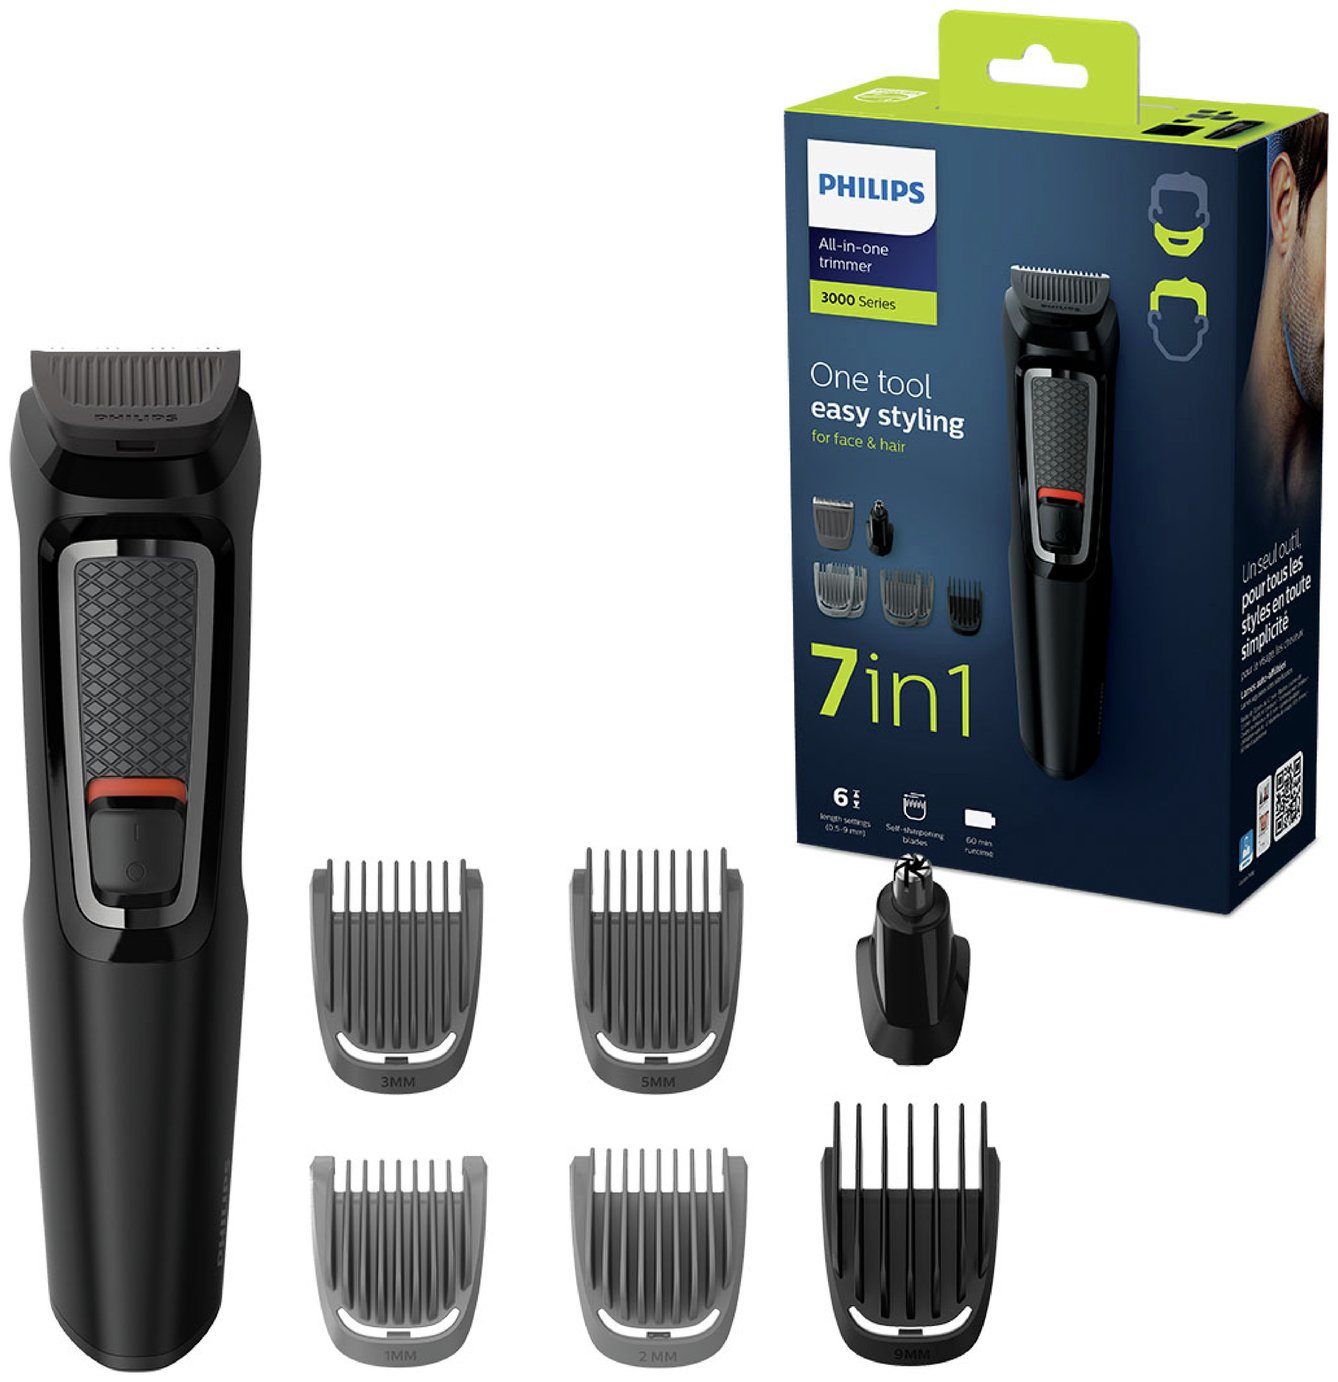 Philips 7 in 1 Beard Trimmer and Hair Clipper Kit MG3720/33